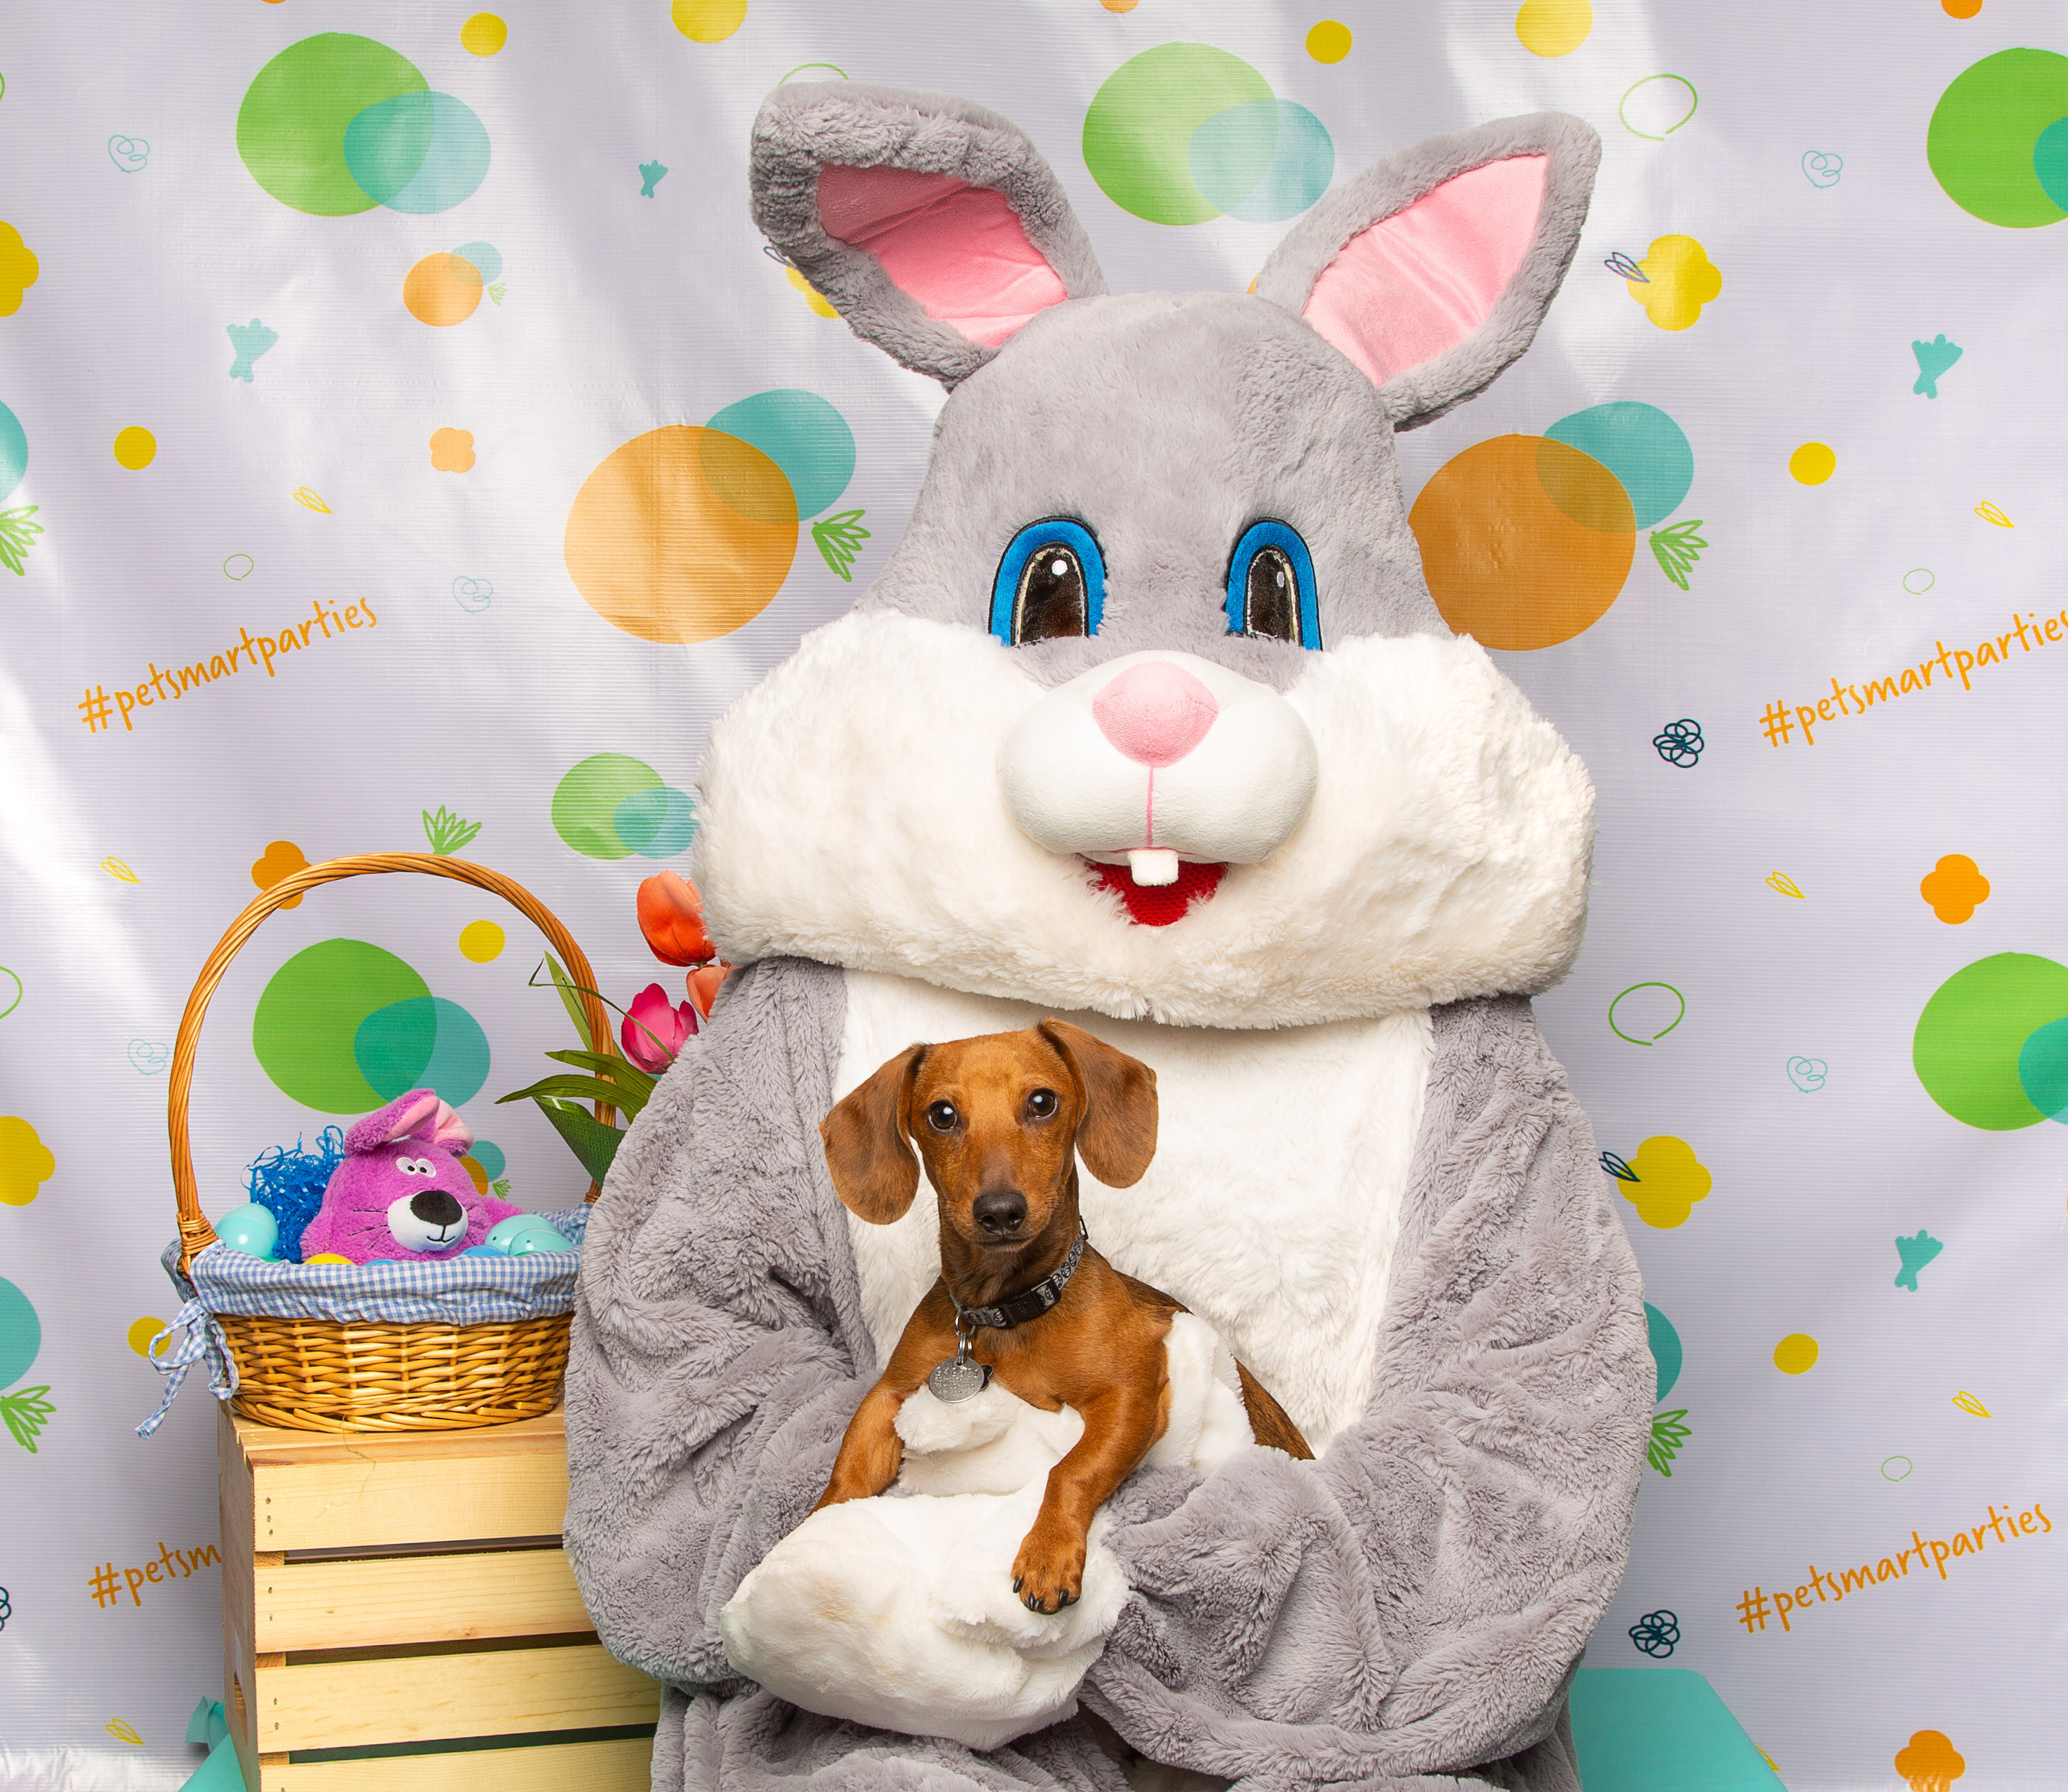 PetSmart Easter photo 2022: When, where, how pets get free picture with Easter Bunny